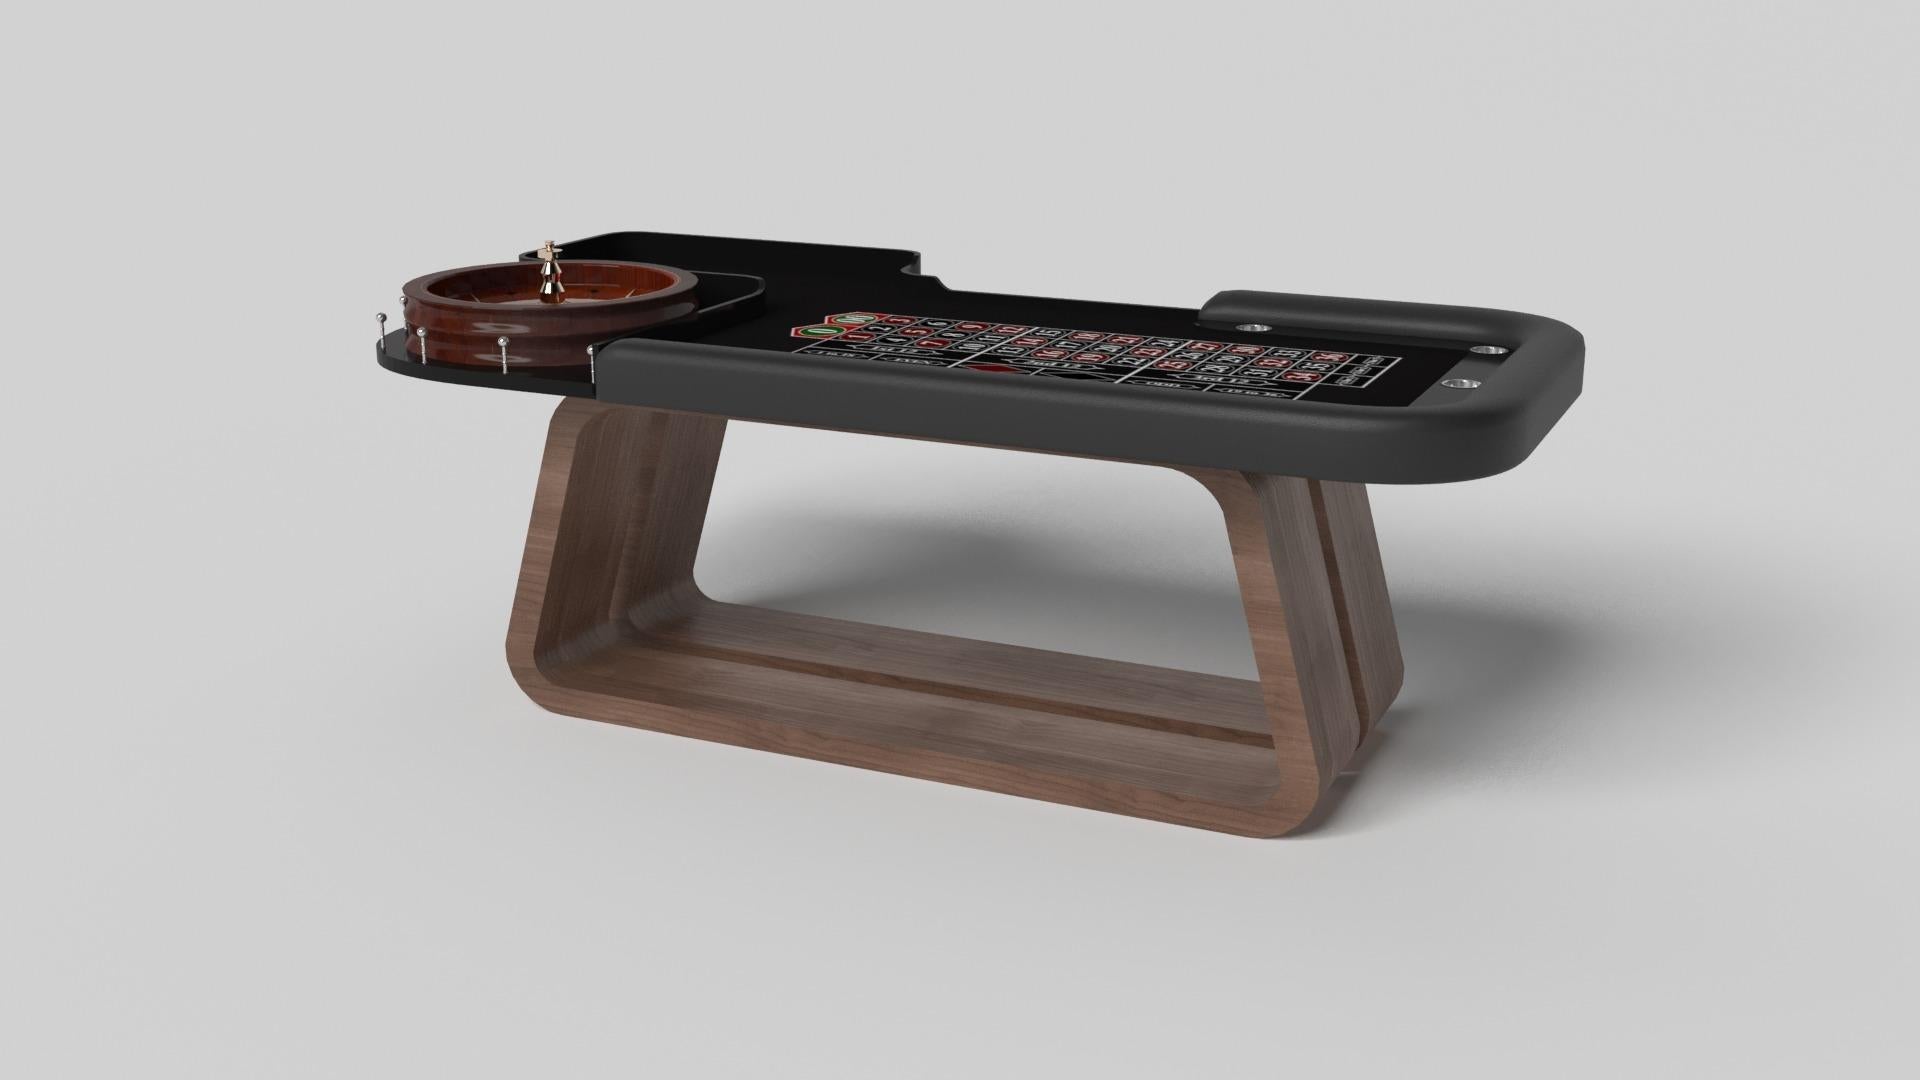 An open base with sweeping curves and smooth edges imparts a light, airy feel upon the Luge roulette table in walnut. Evoking a sense of speed and the spirit of continuous movement, this exclusive game table features a split base with open sides and